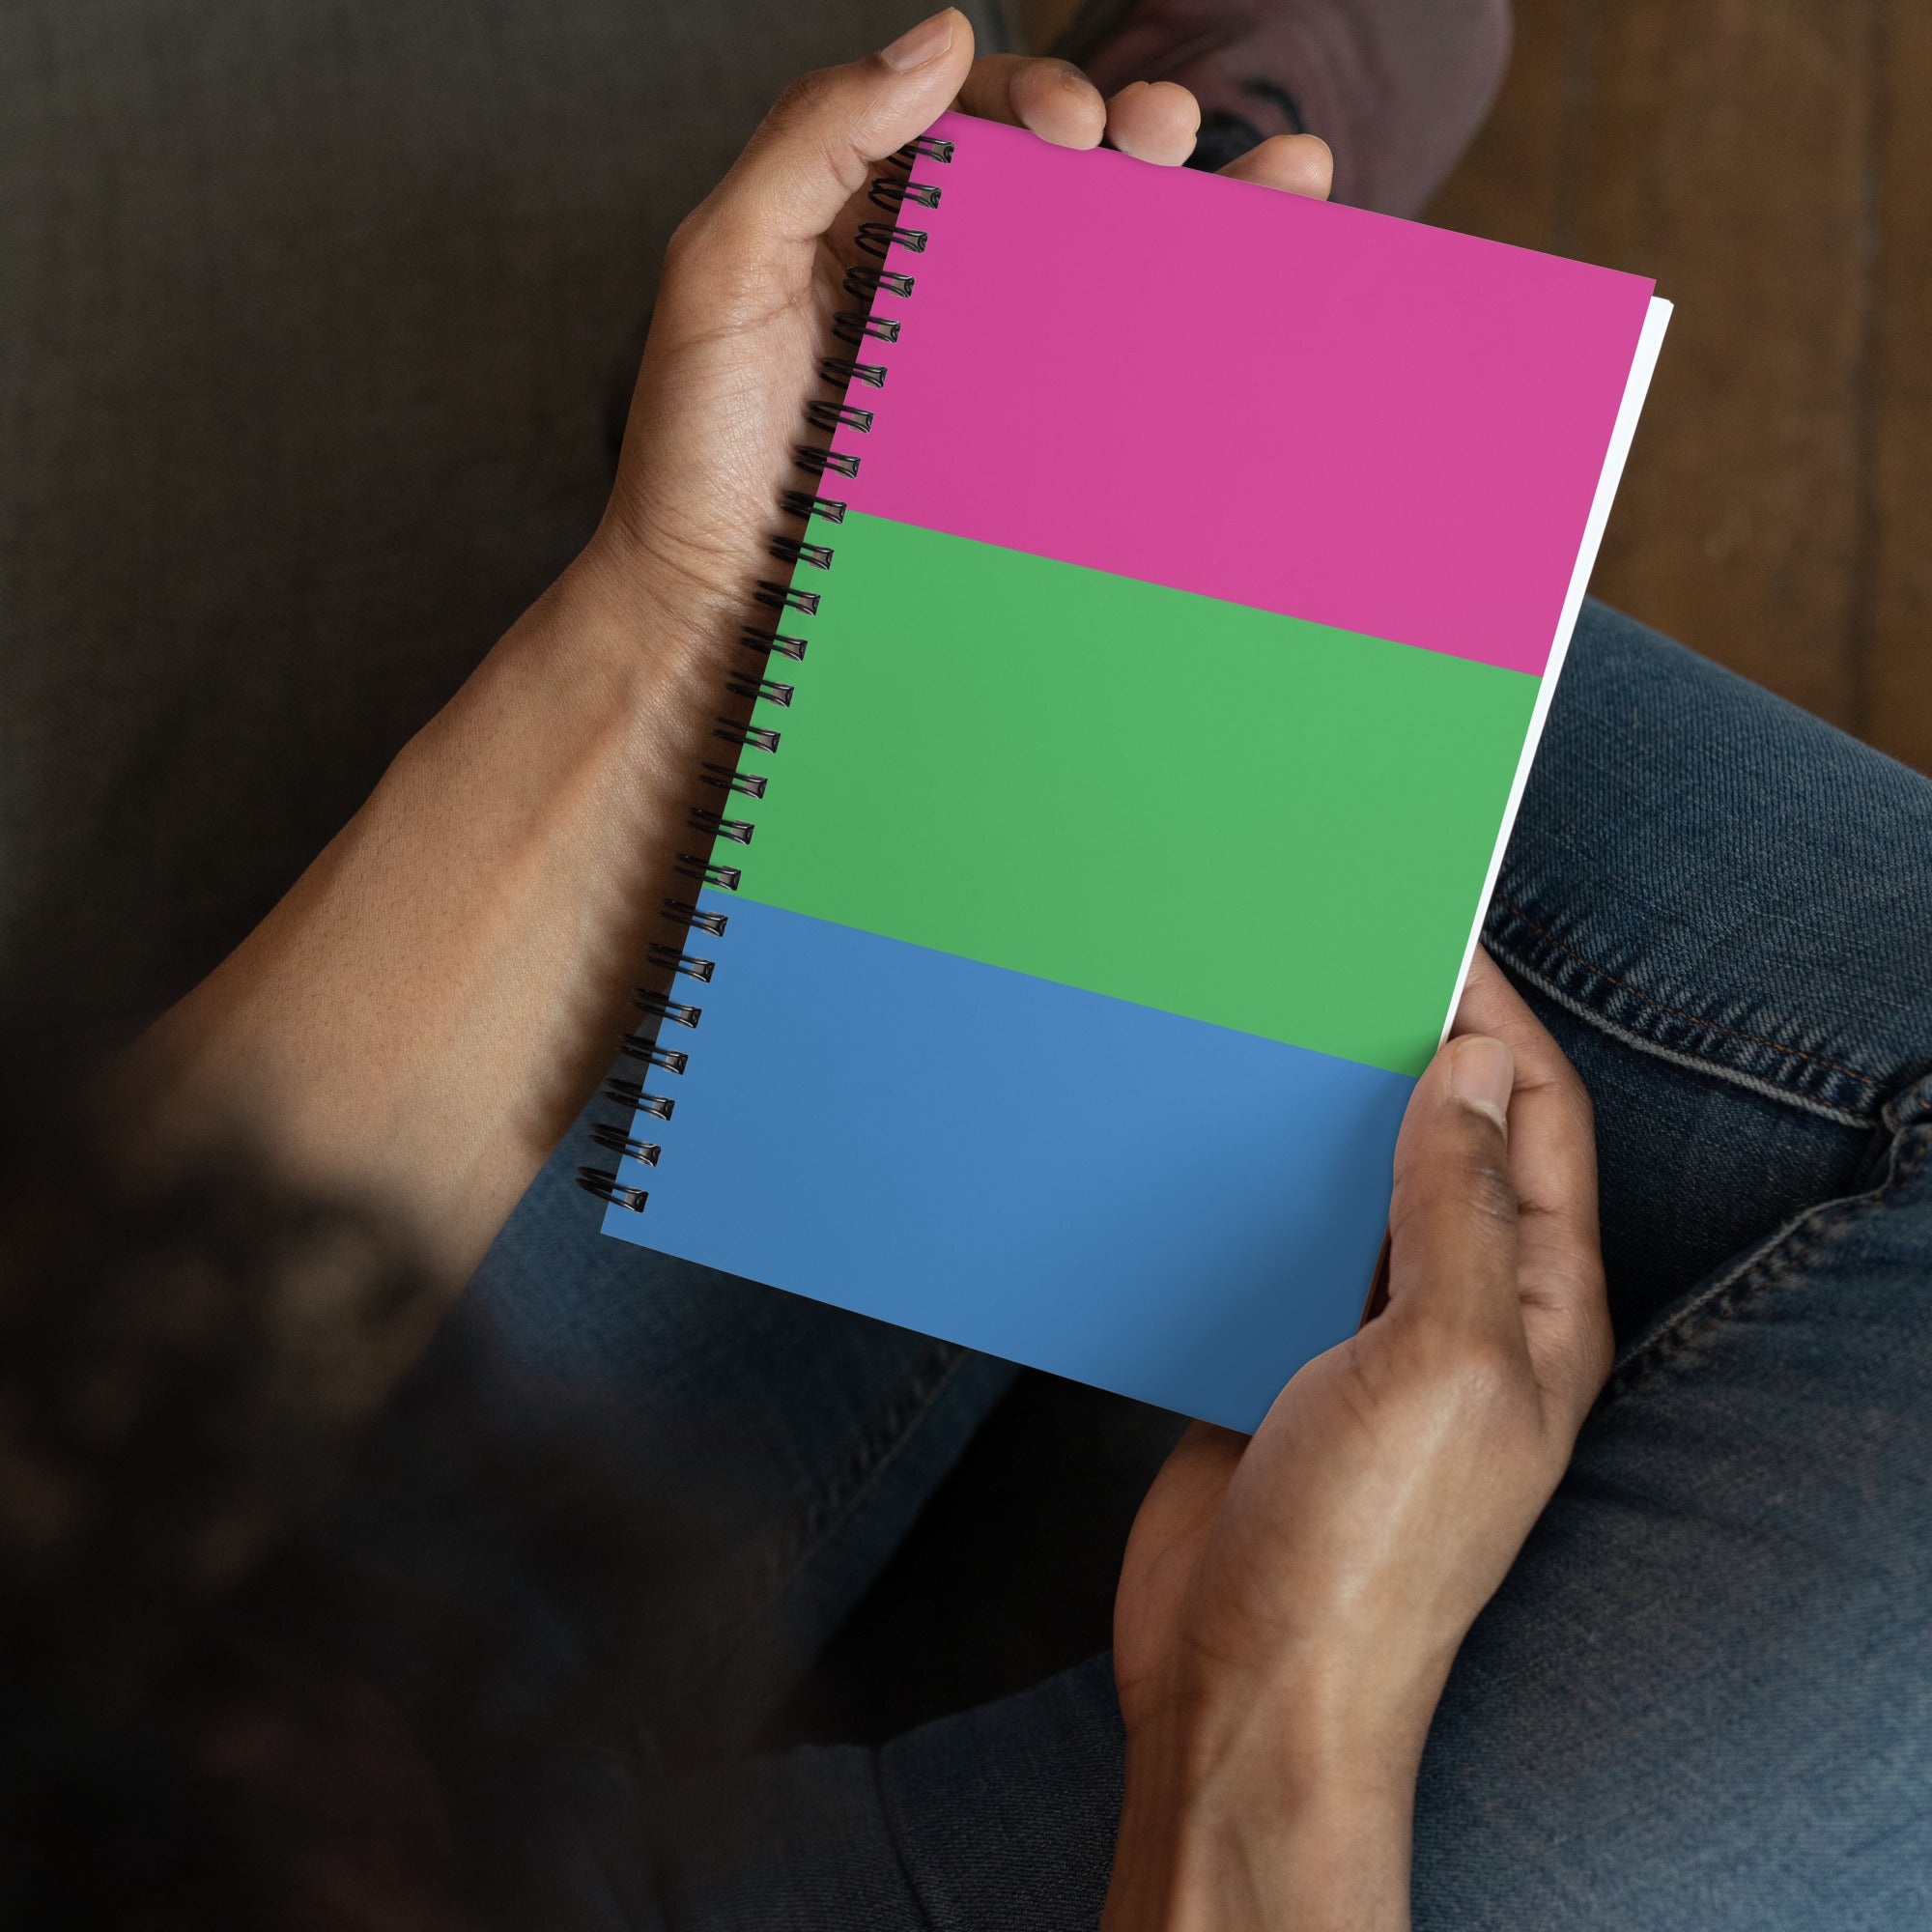 Spiral notebook- Polysexual